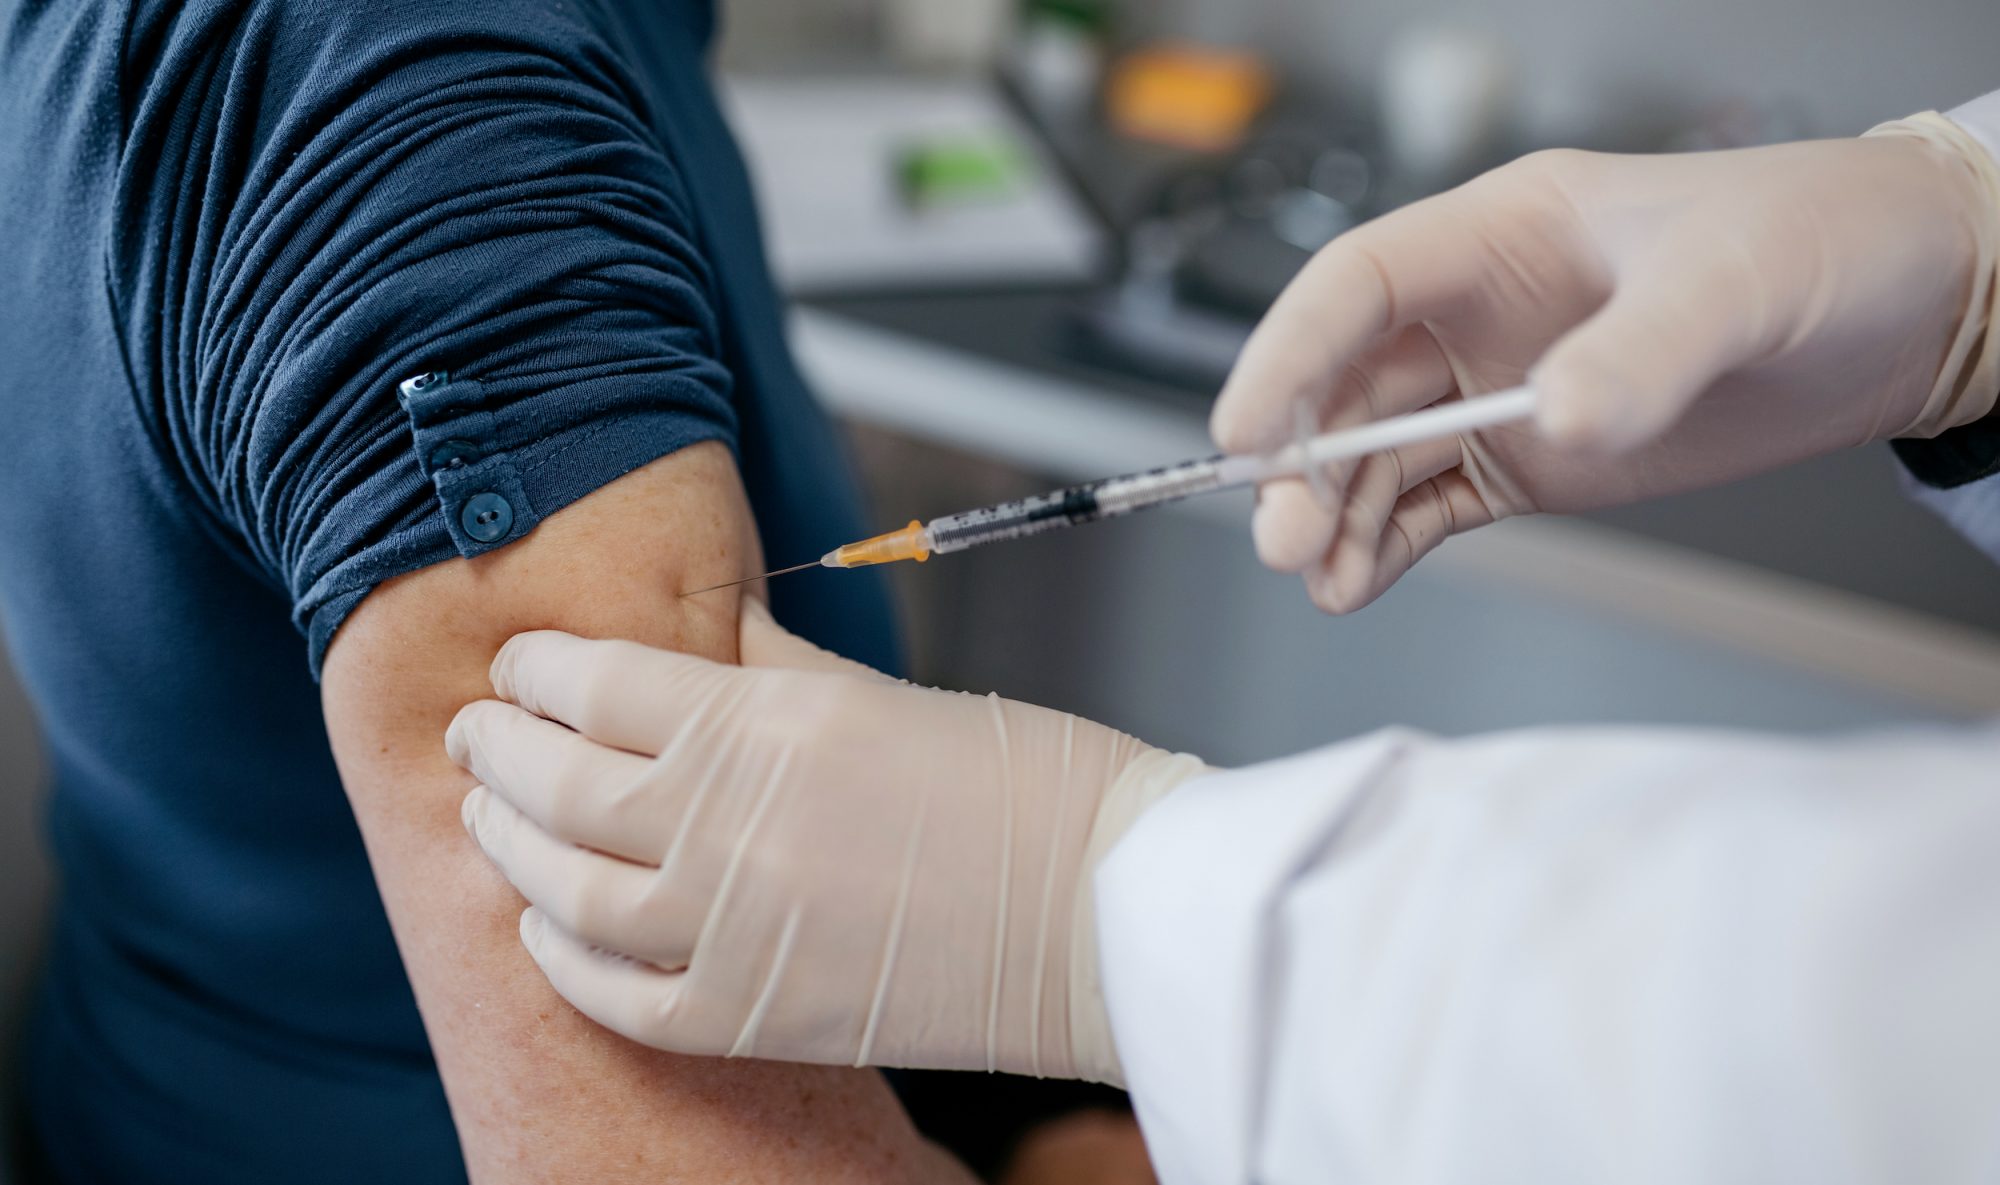 5 tips for relieving arm pain after vaccine